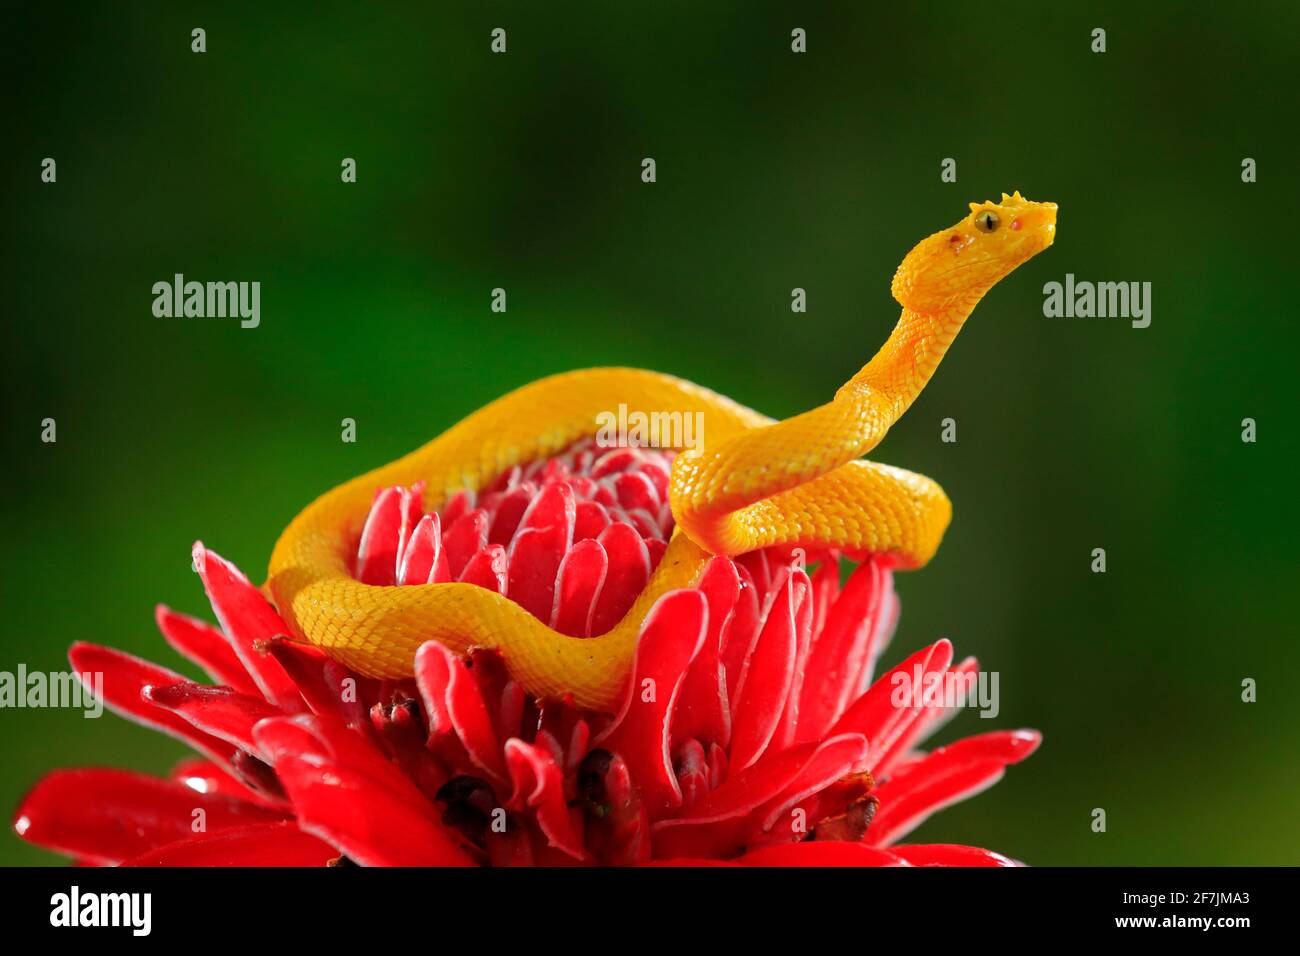 Poison snake from tropic forest. Yellow Eyelash Palm Pitviper, Bothriechis schlegeli, on the red wild flower. Wildlife scene from tropic forest. Bloom Stock Photo